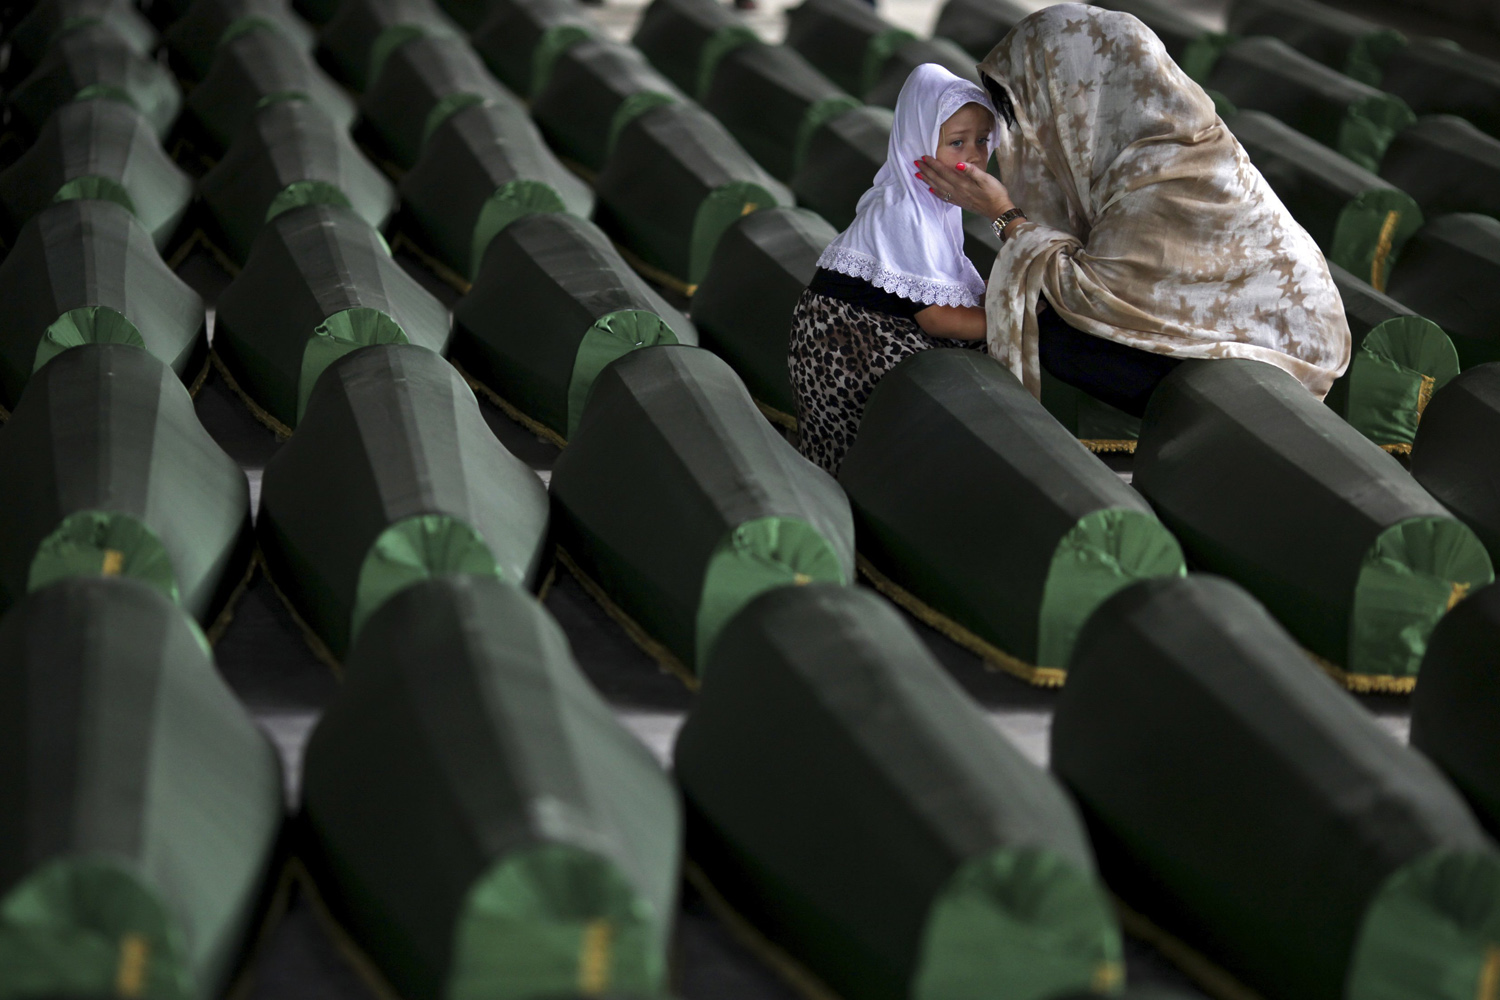 A Bosnian Muslim woman and child cry near the coffin of their relative, which is one of the 175 coffins of newly identified victims from the 1995 Srebrenica massacre, in the Potocari Memorial Center, near Srebrenica